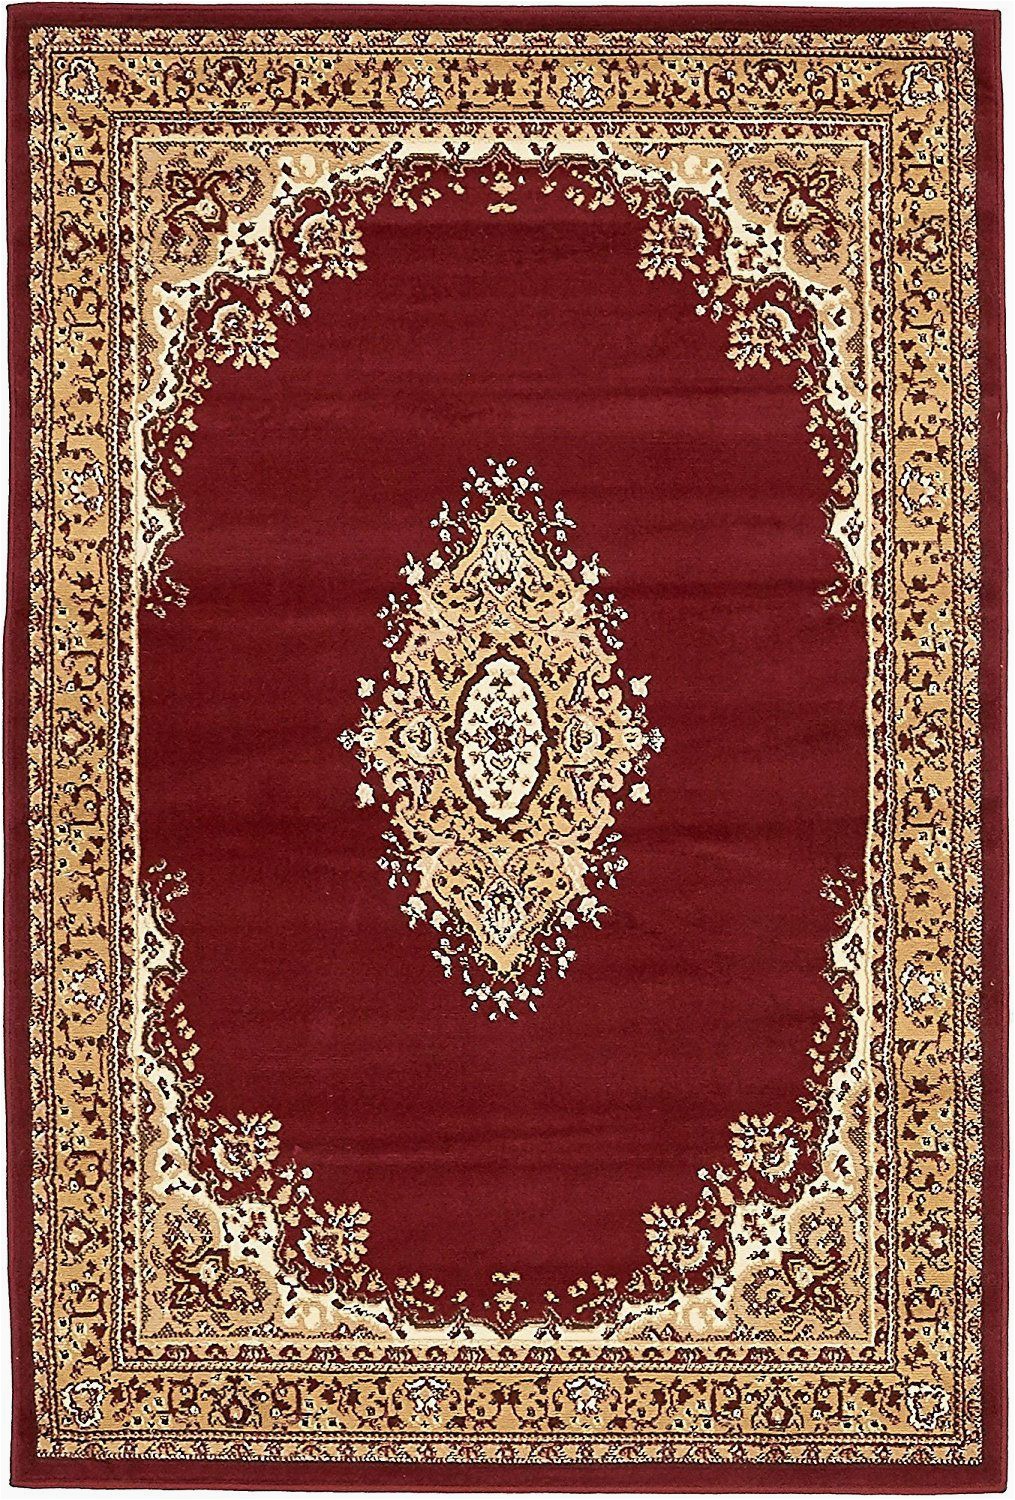 4 X 6 Rubber Backed area Rugs Country Traditional 4 Feet by 6 Feet 4 X 6 Mashad Design